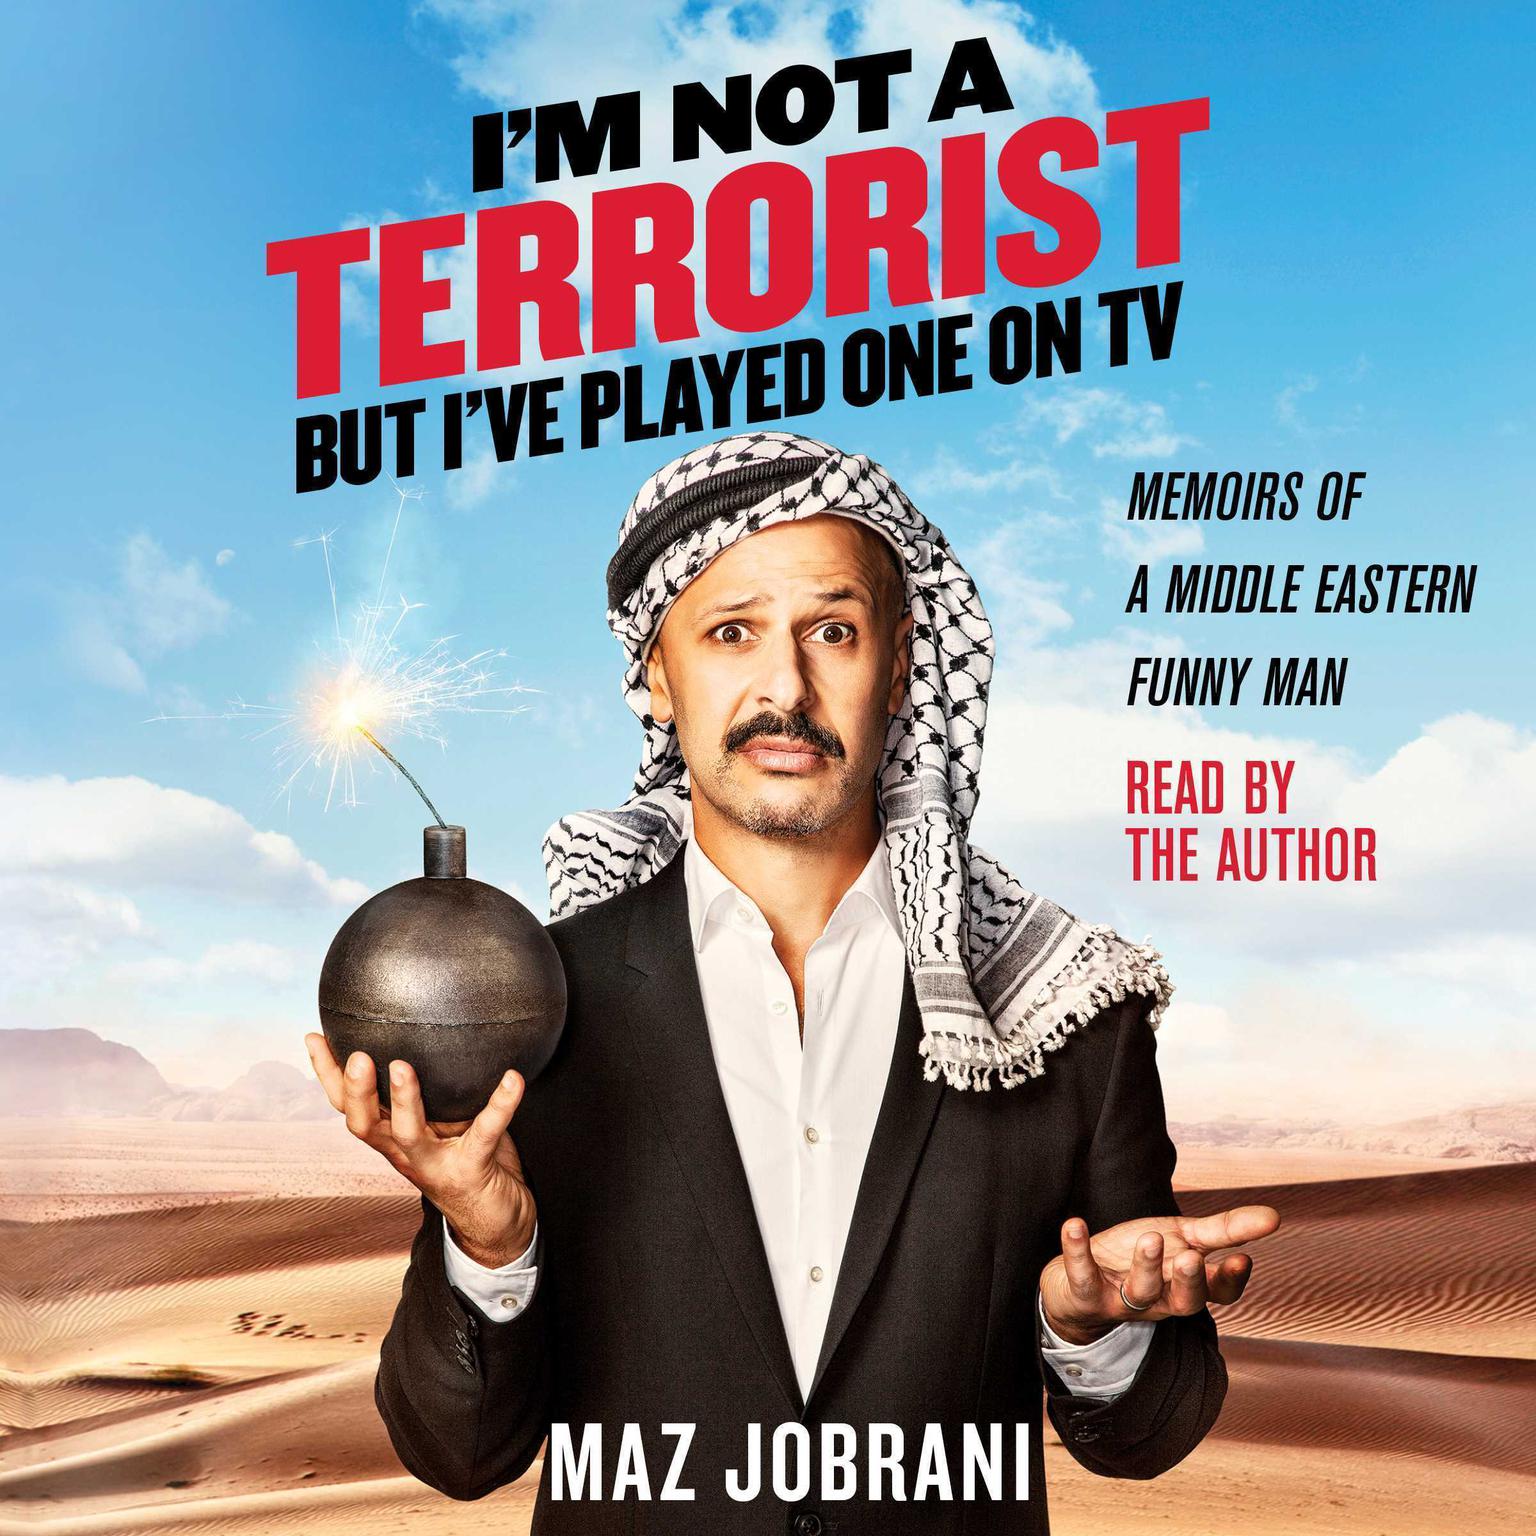 Im Not a Terrorist, But Ive Played One On TV: Memoirs of a Middle Eastern Funny Man Audiobook, by Maz Jobrani